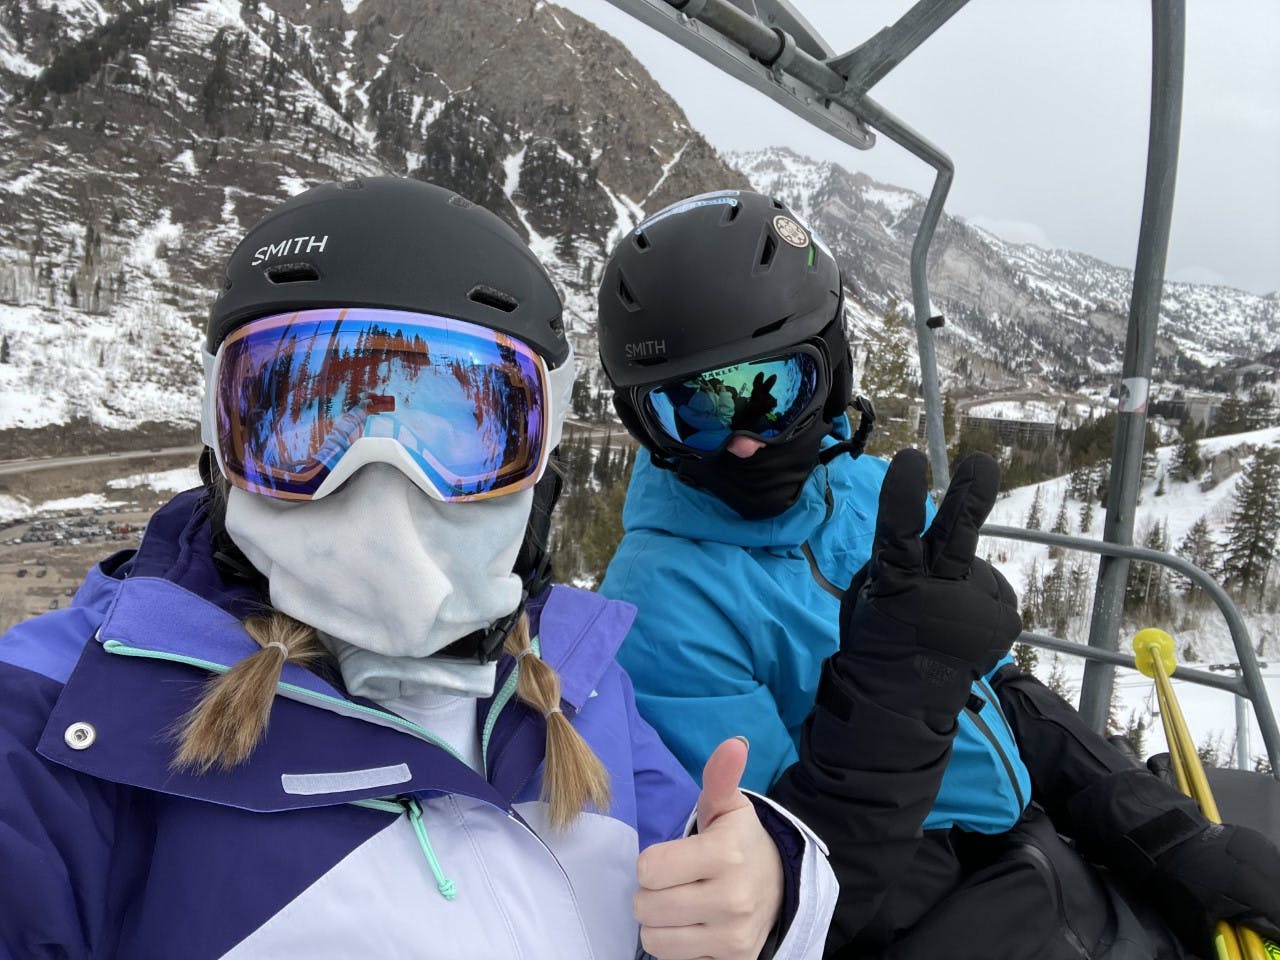 Two skiers on a chairlift. One is giving a thumbs up. 